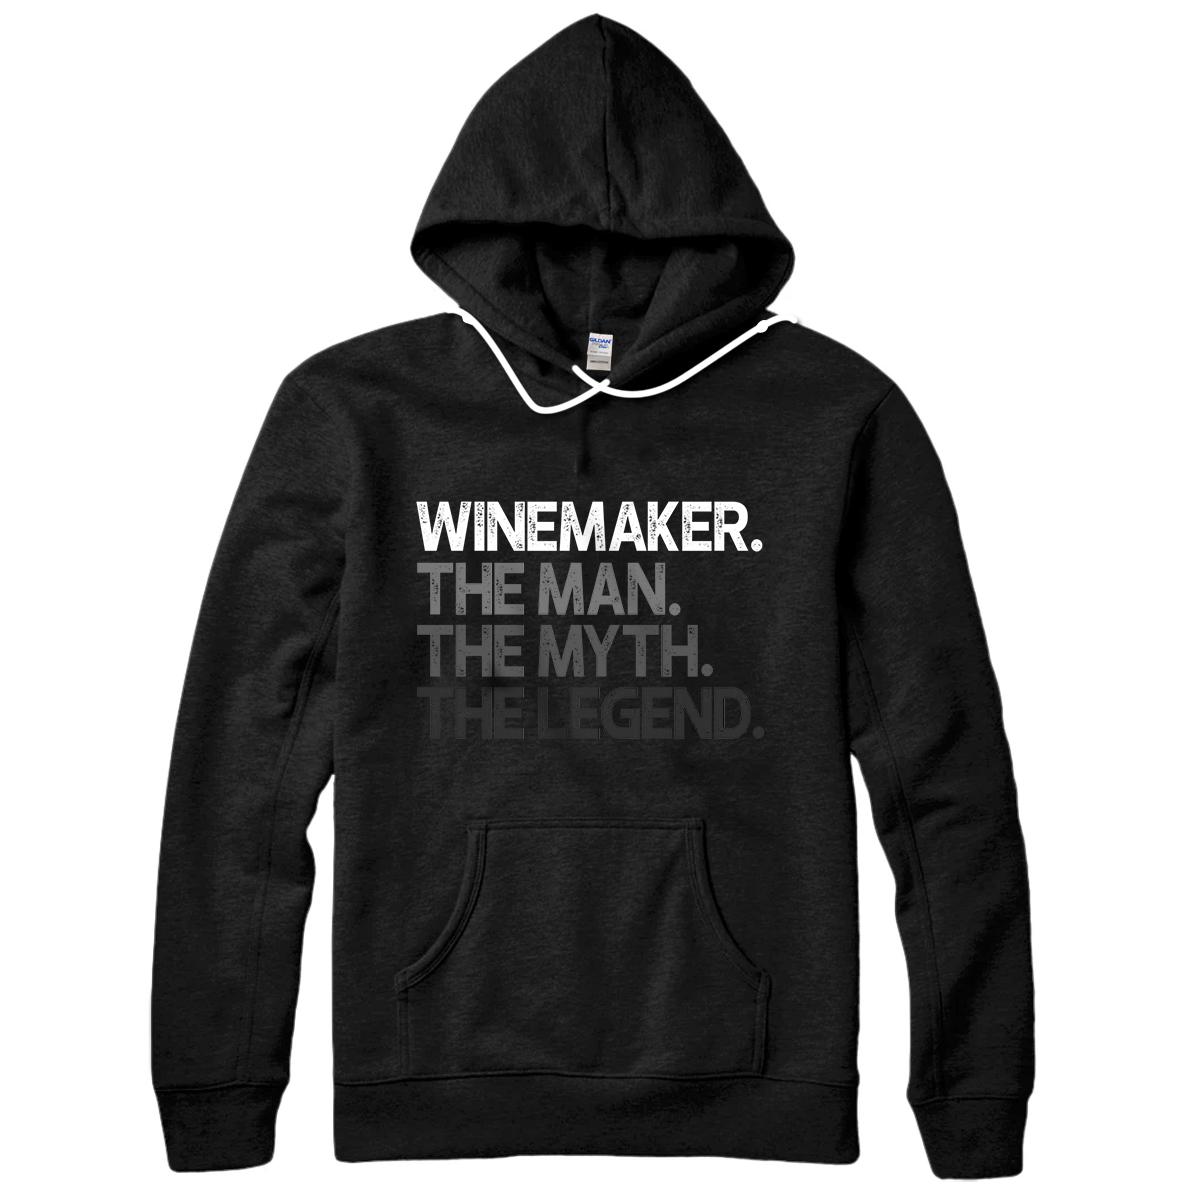 Personalized Winemaker Gift Man Myth The Legend Pullover Hoodie